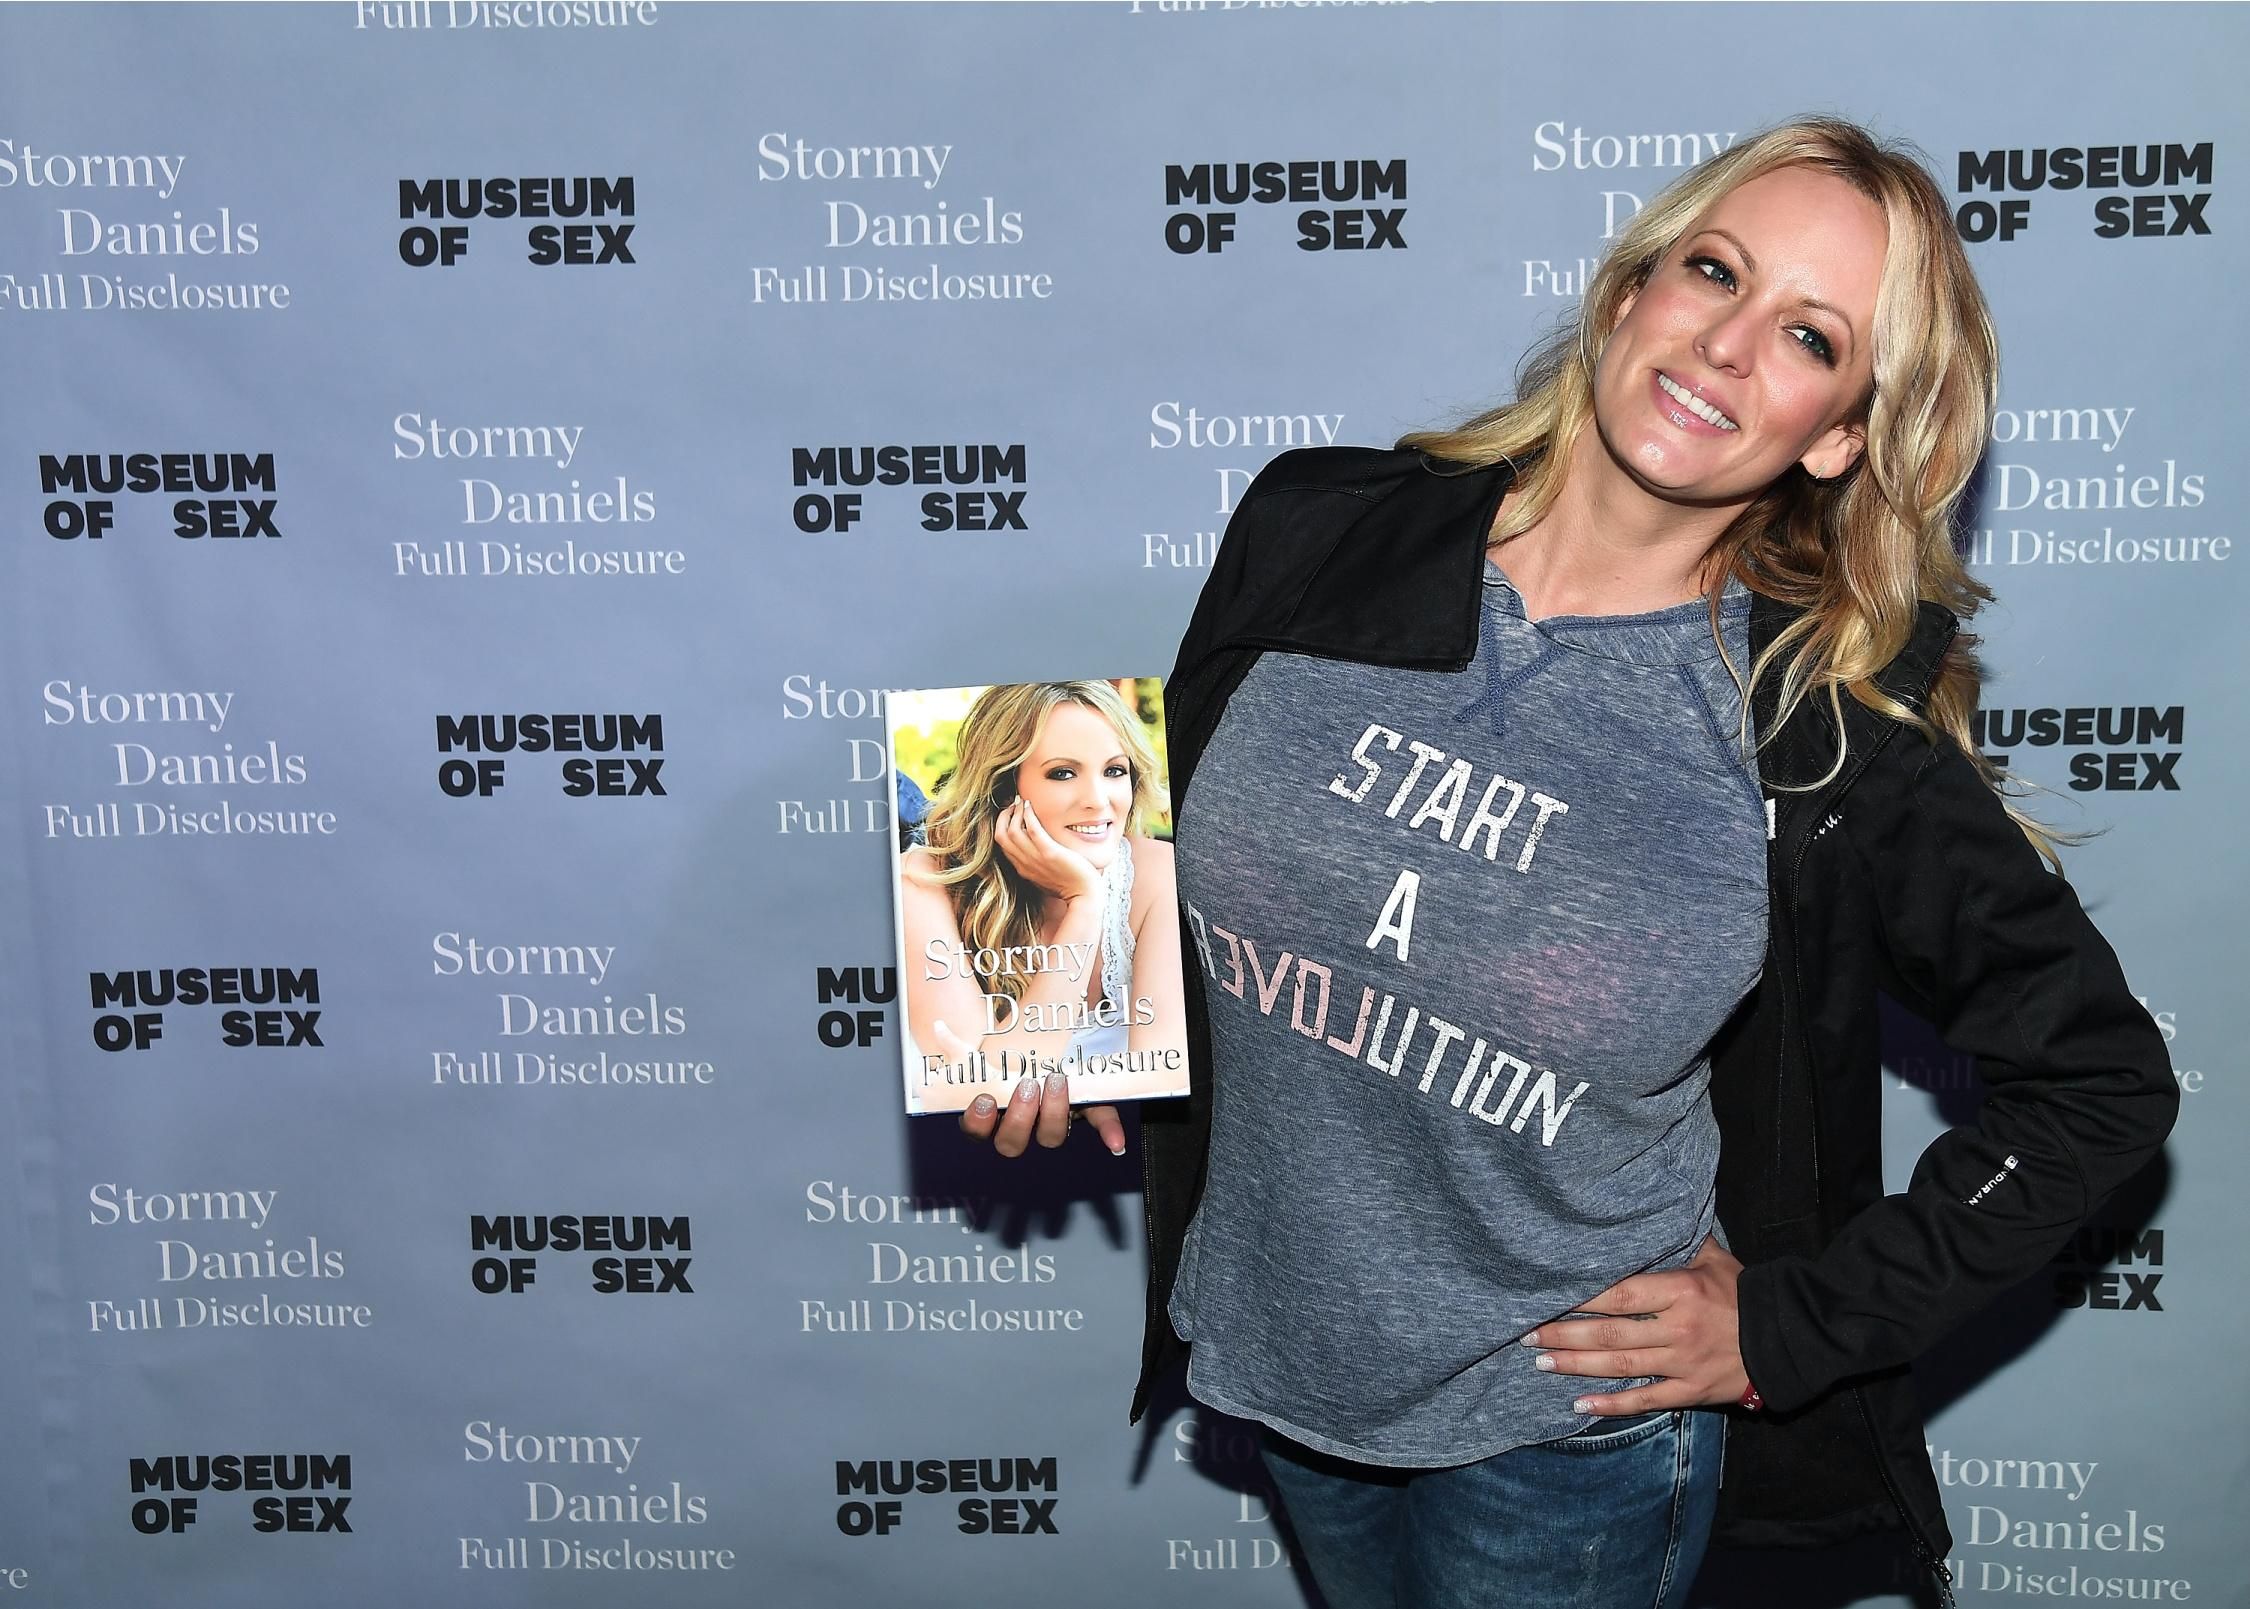 Stormy Daniels signs copies of her book <em>Full Disclosure<em> on October 8, 2018 at the Museum of Sex in New York City. (Photo: Nicholas Hunt/Getty Images)